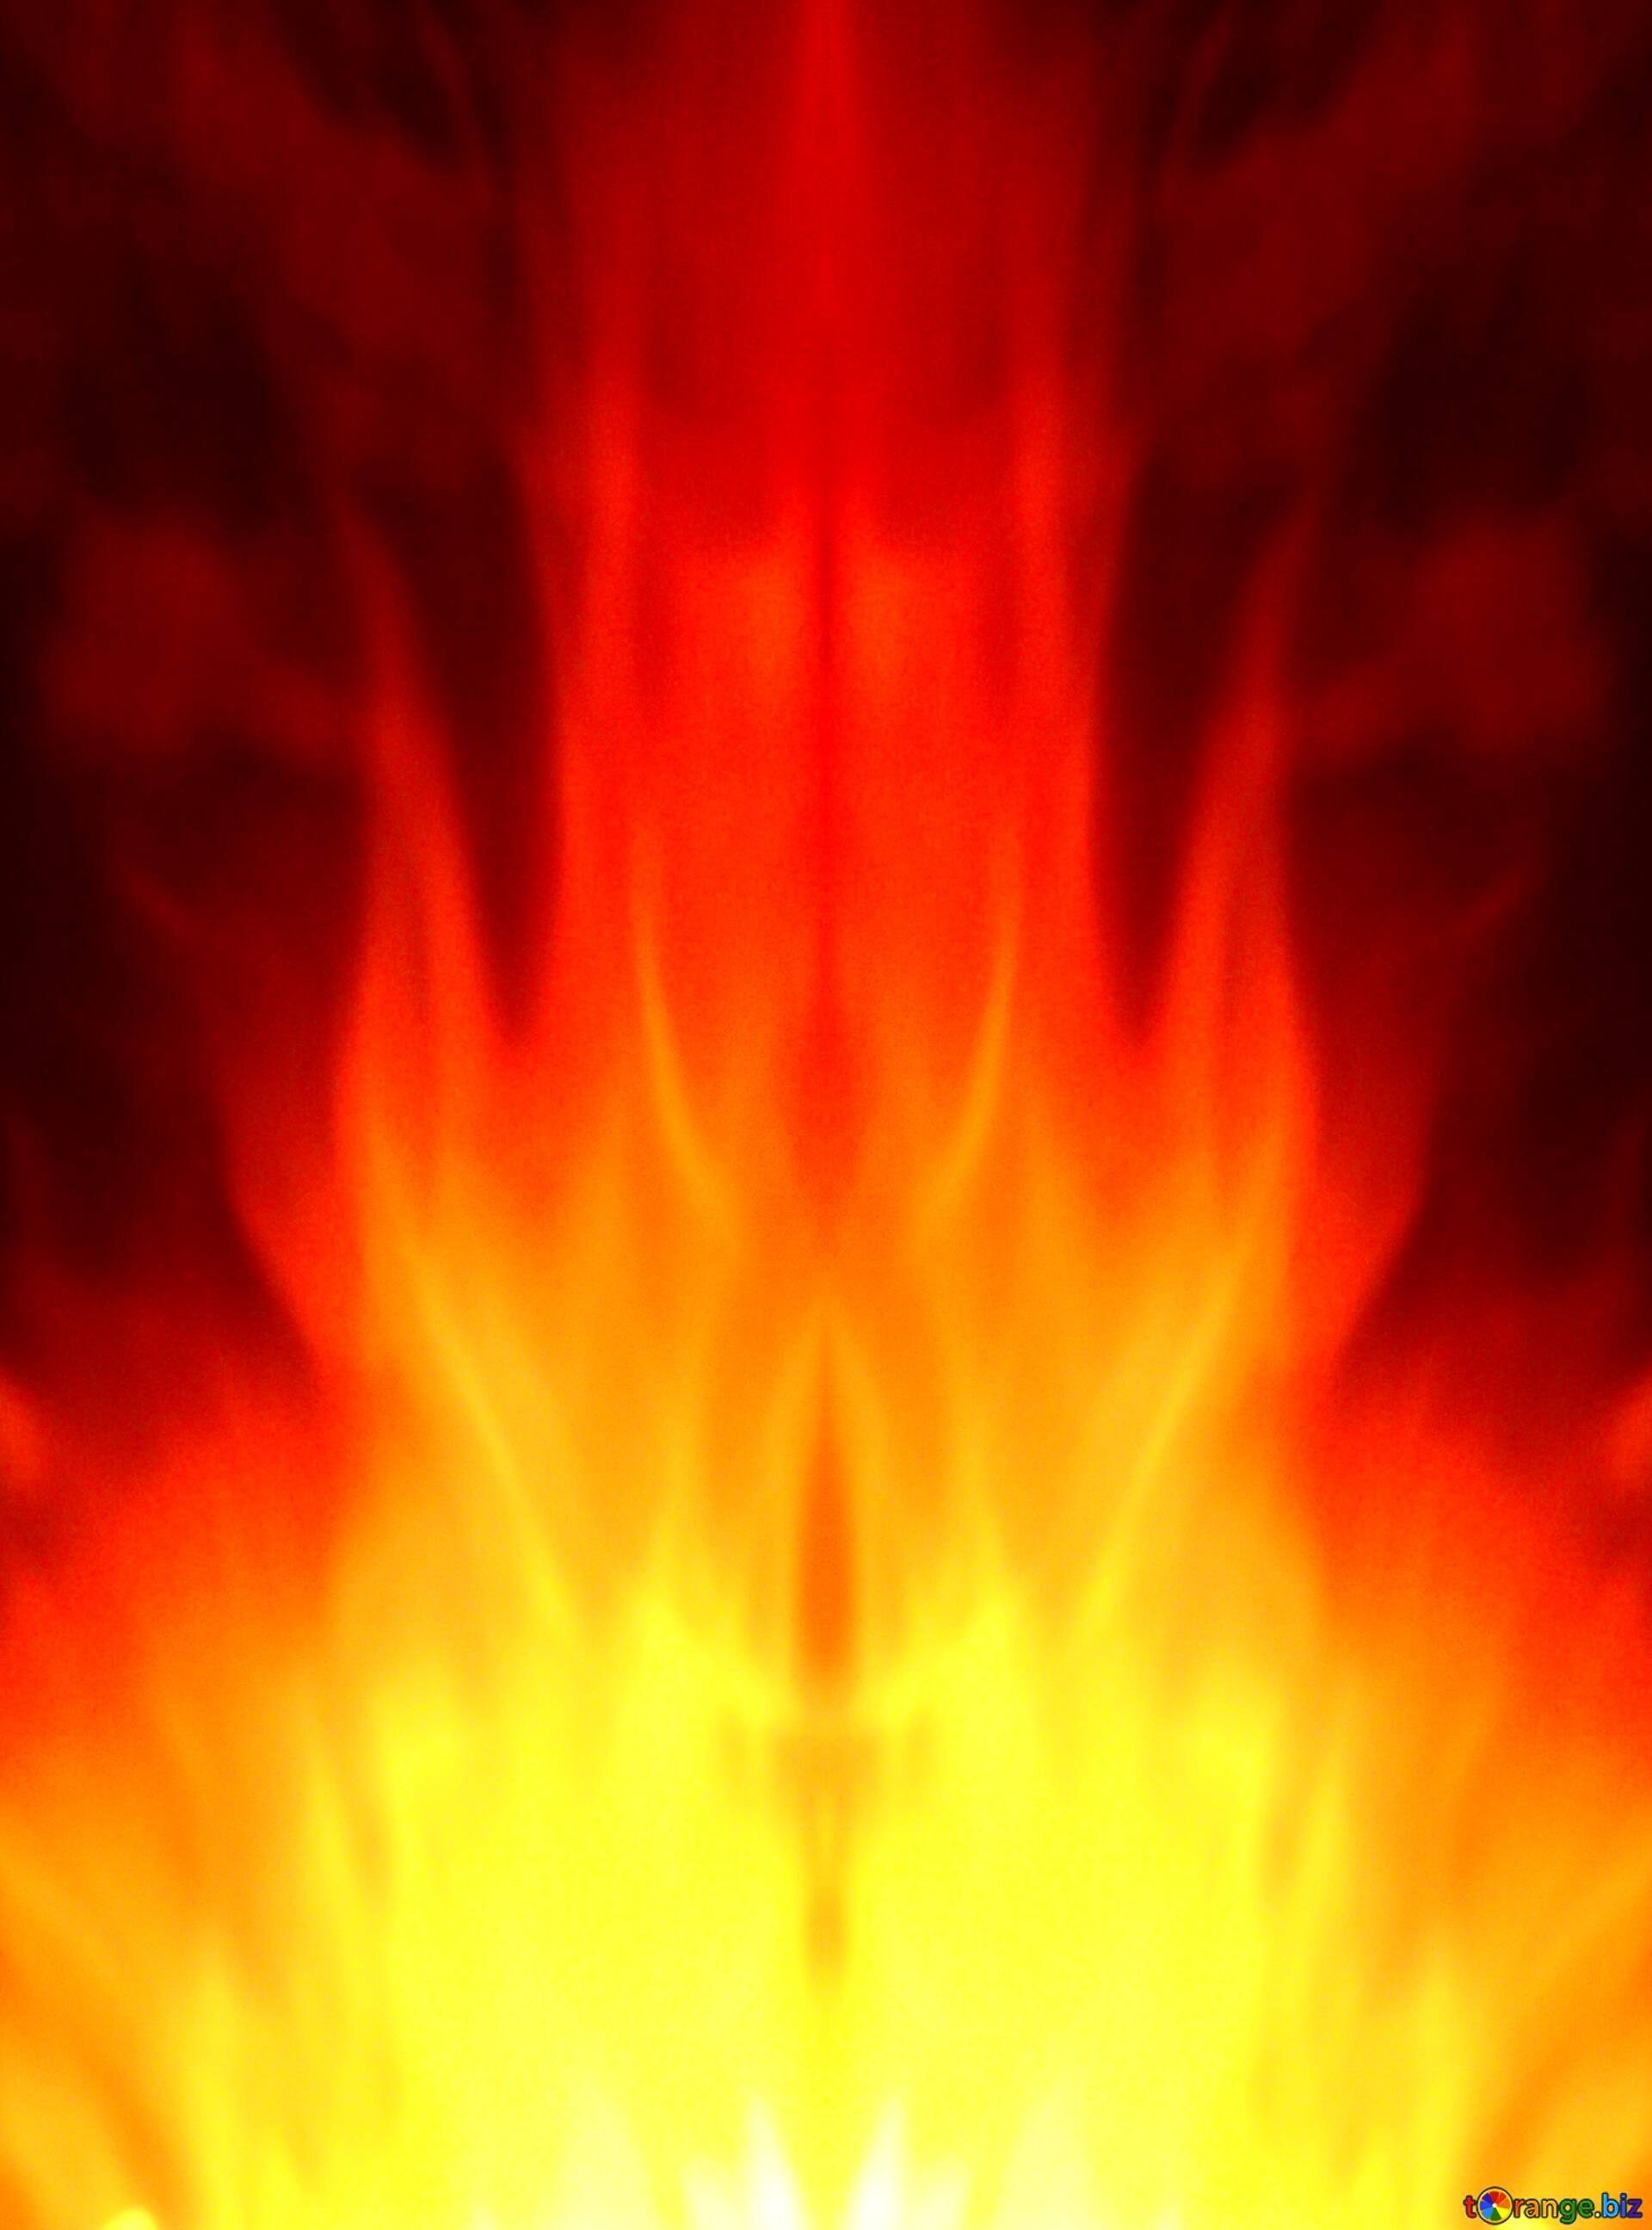 Download free picture fire background for editing on CC-BY License ~ Free  Image Stock  ~ fx №73528